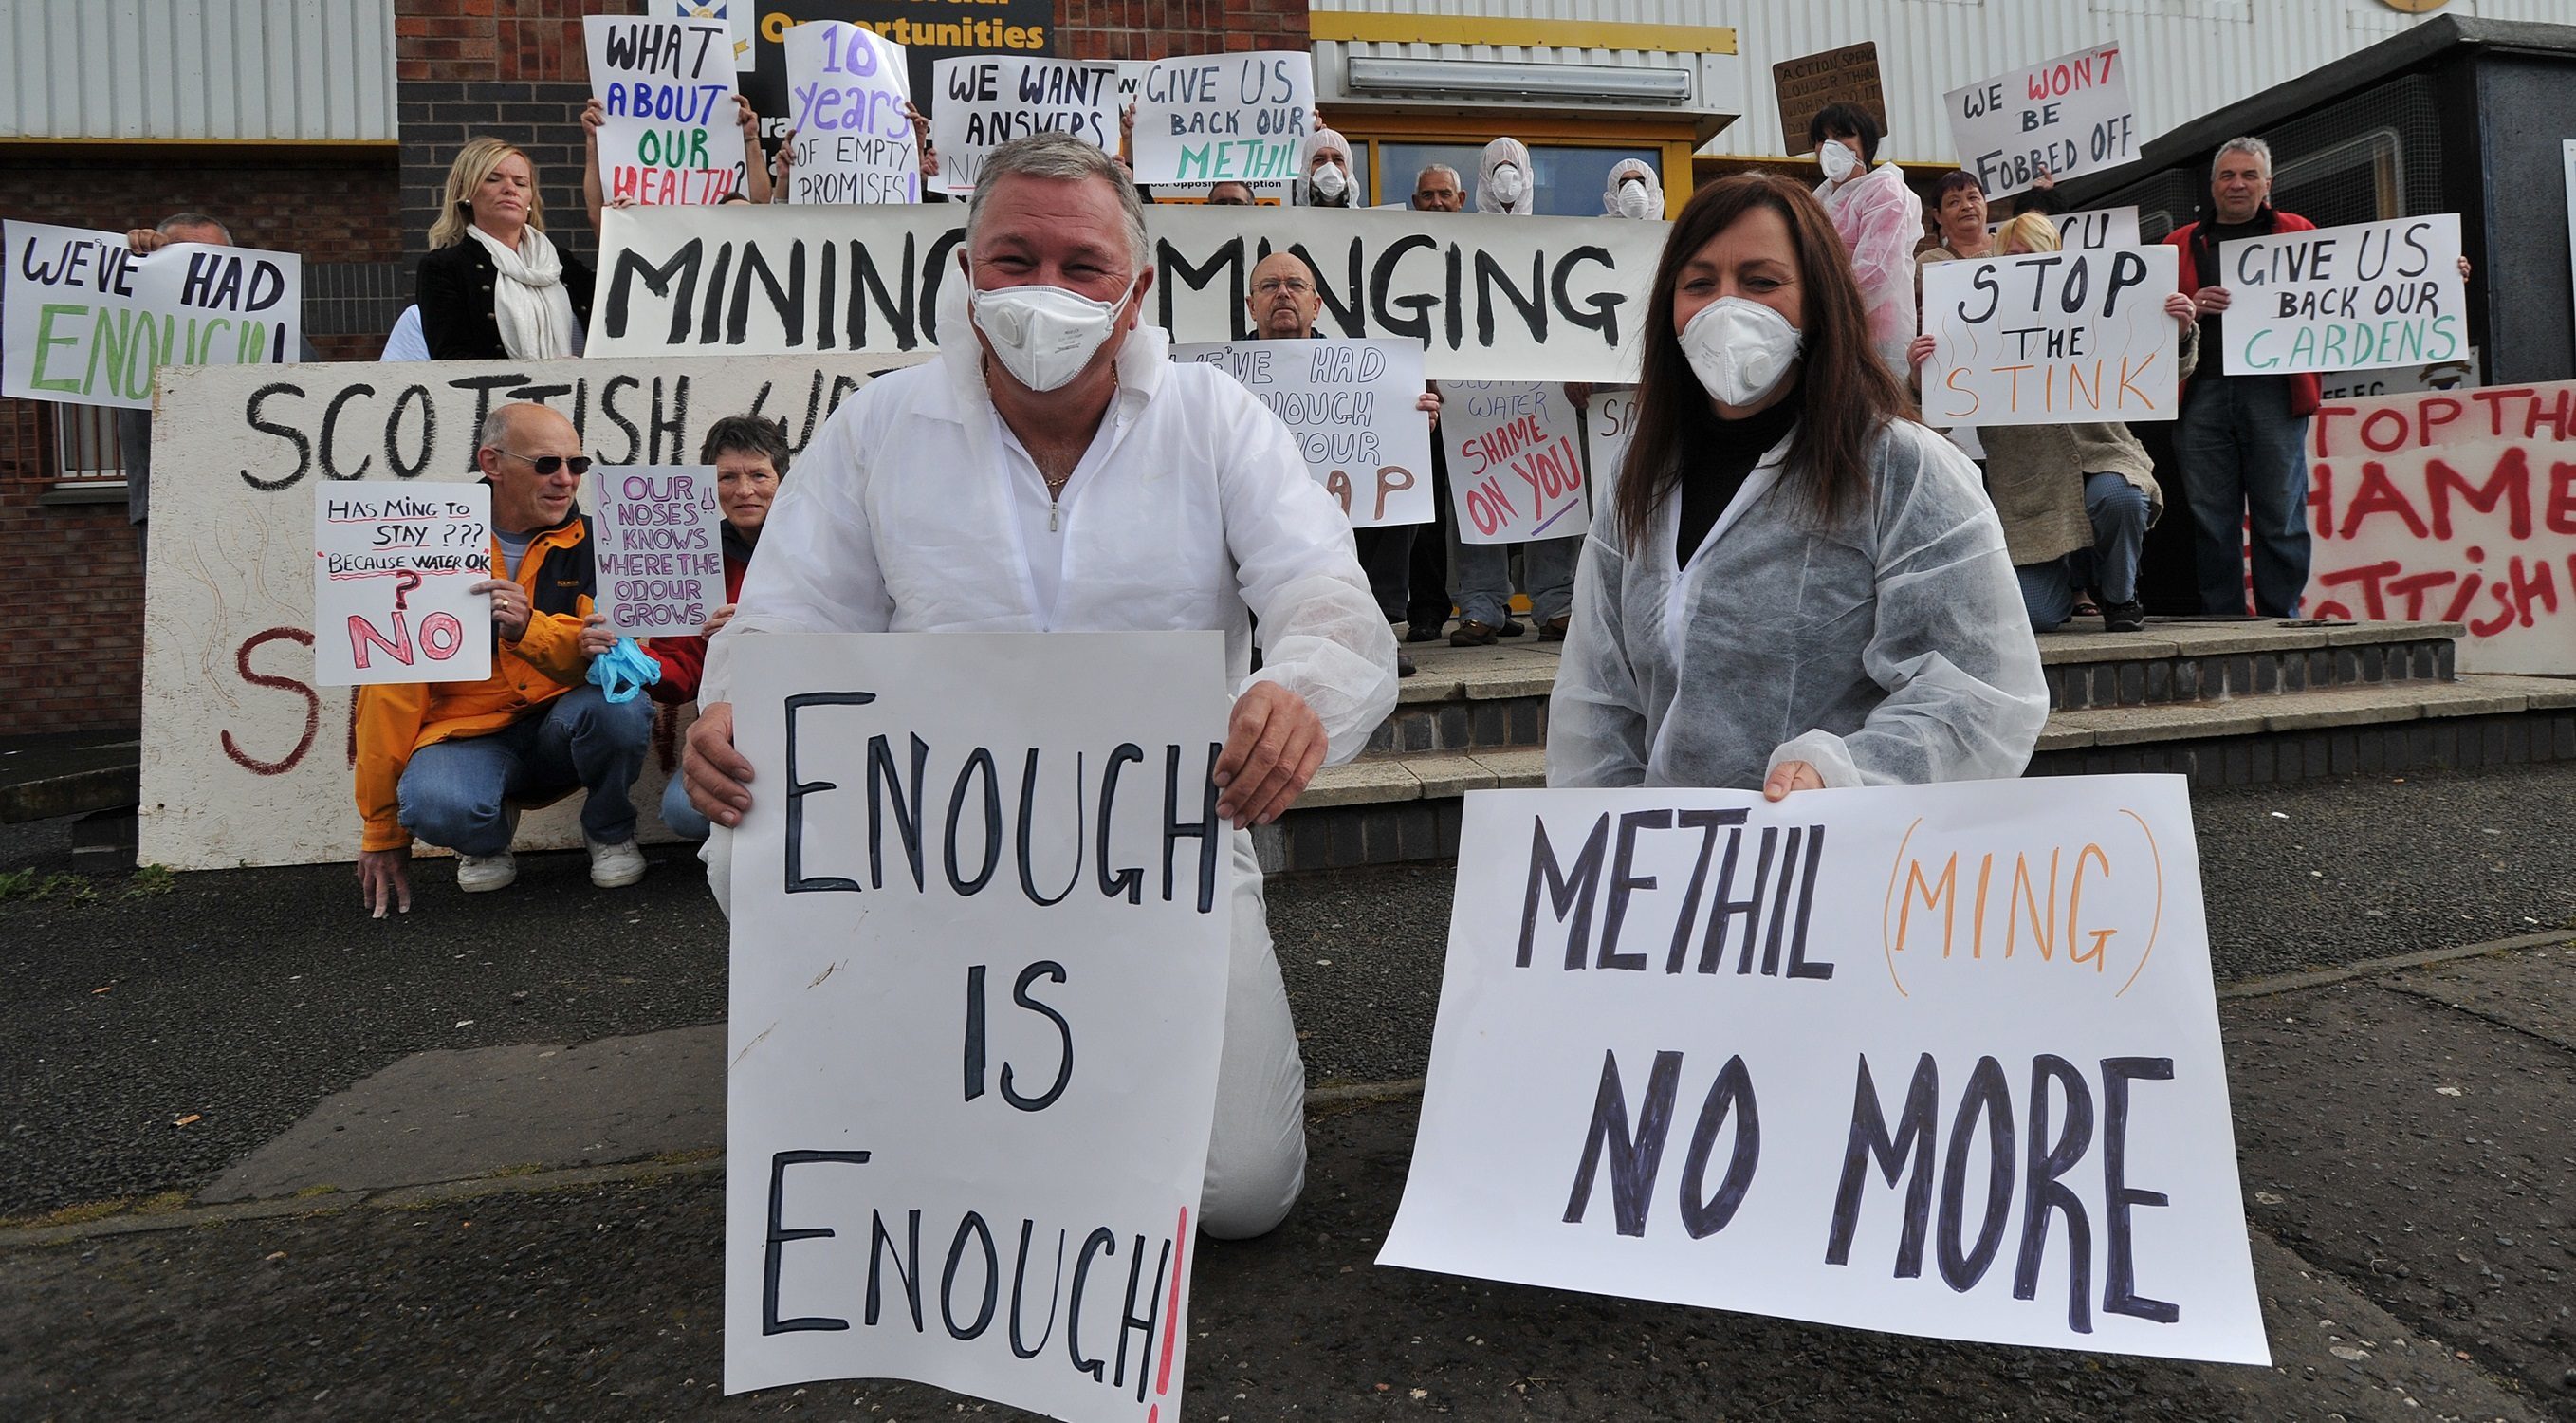 Methil ming protesters lobbied a meeting with Scottish Water in 2012